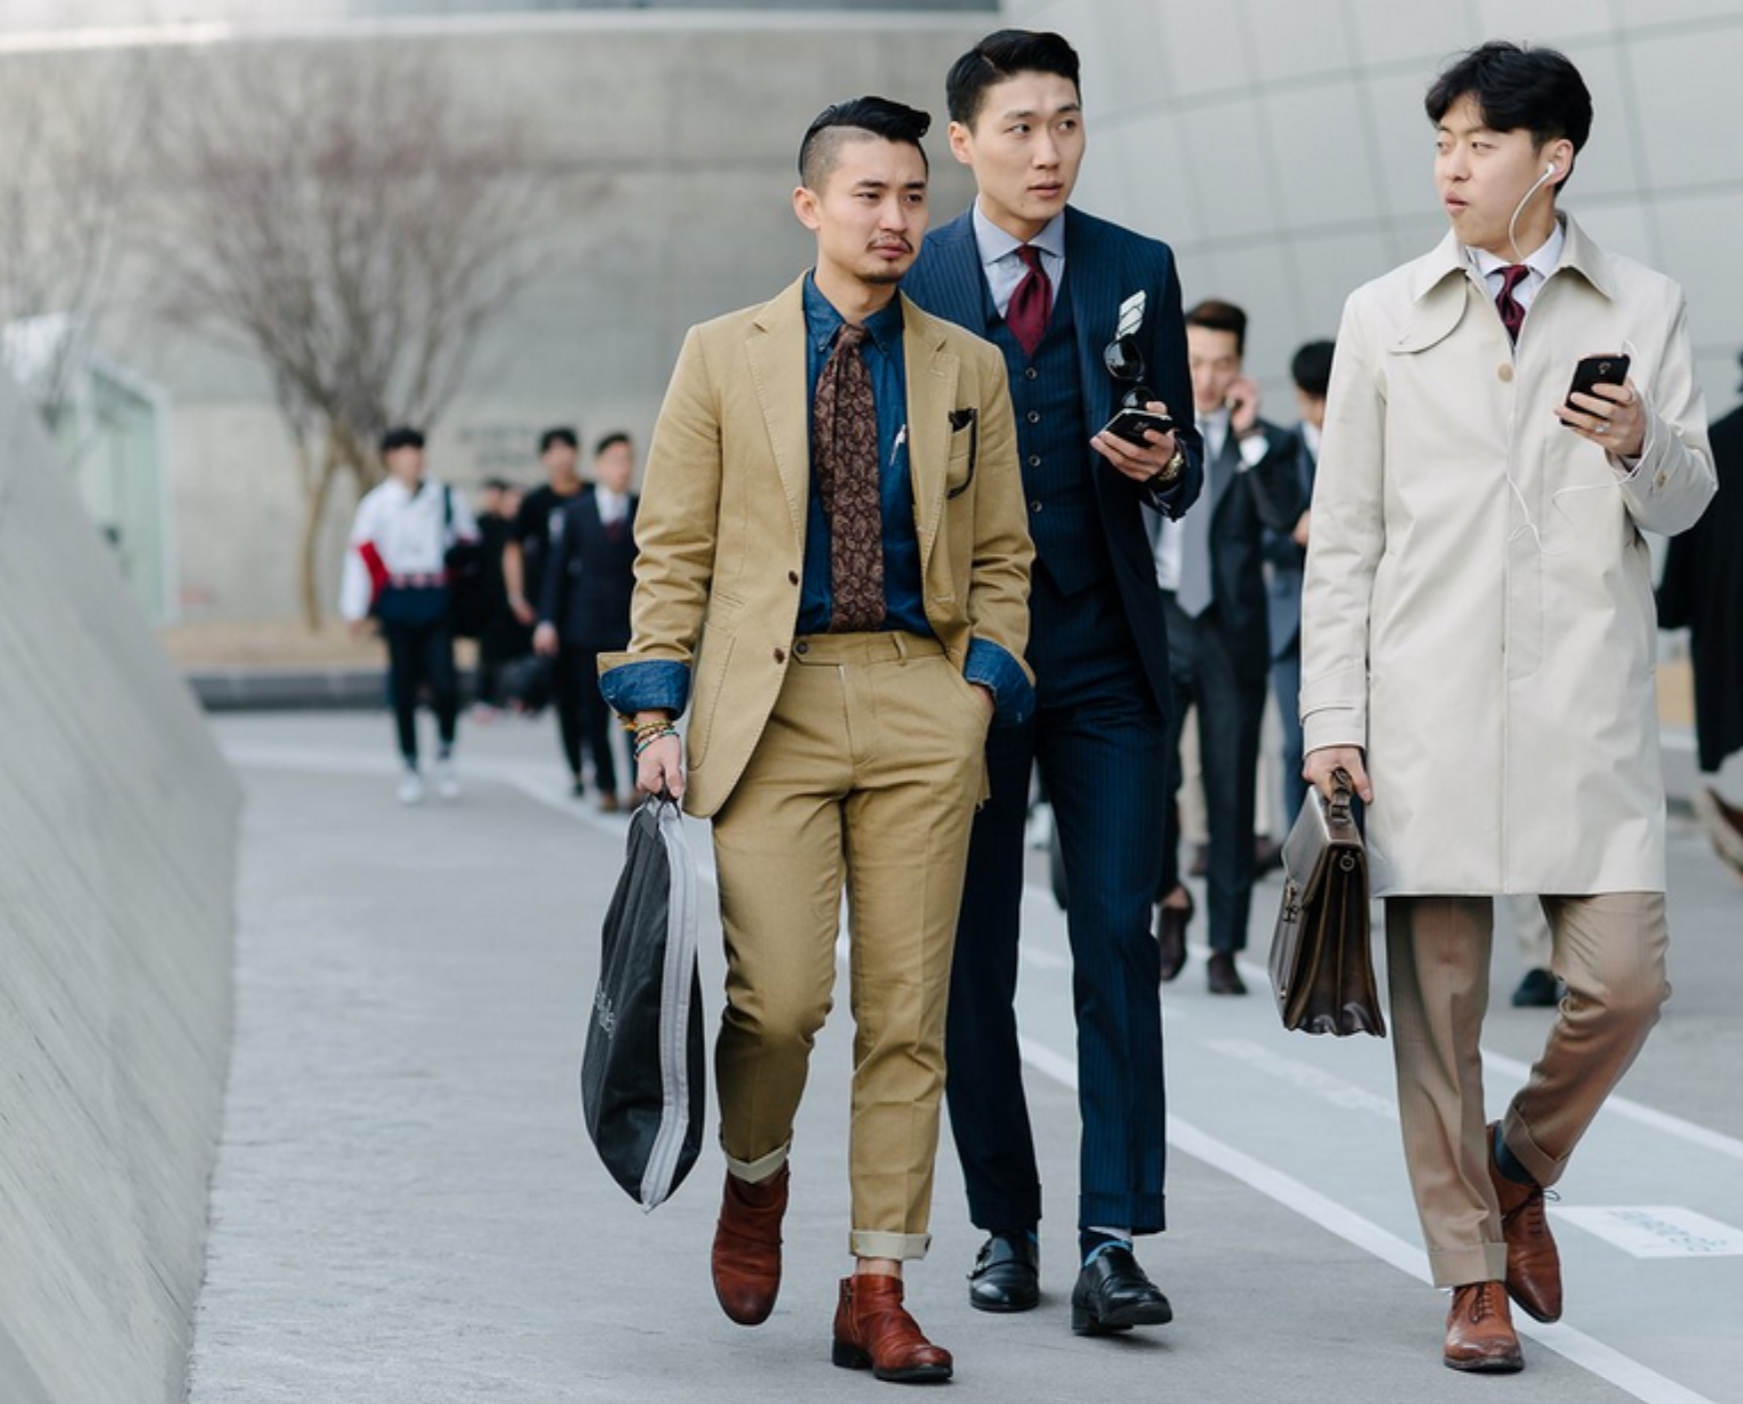 China's mass affluent class males are between 25 and 40 years old and have more refined and varied tastes compared to previous generations.